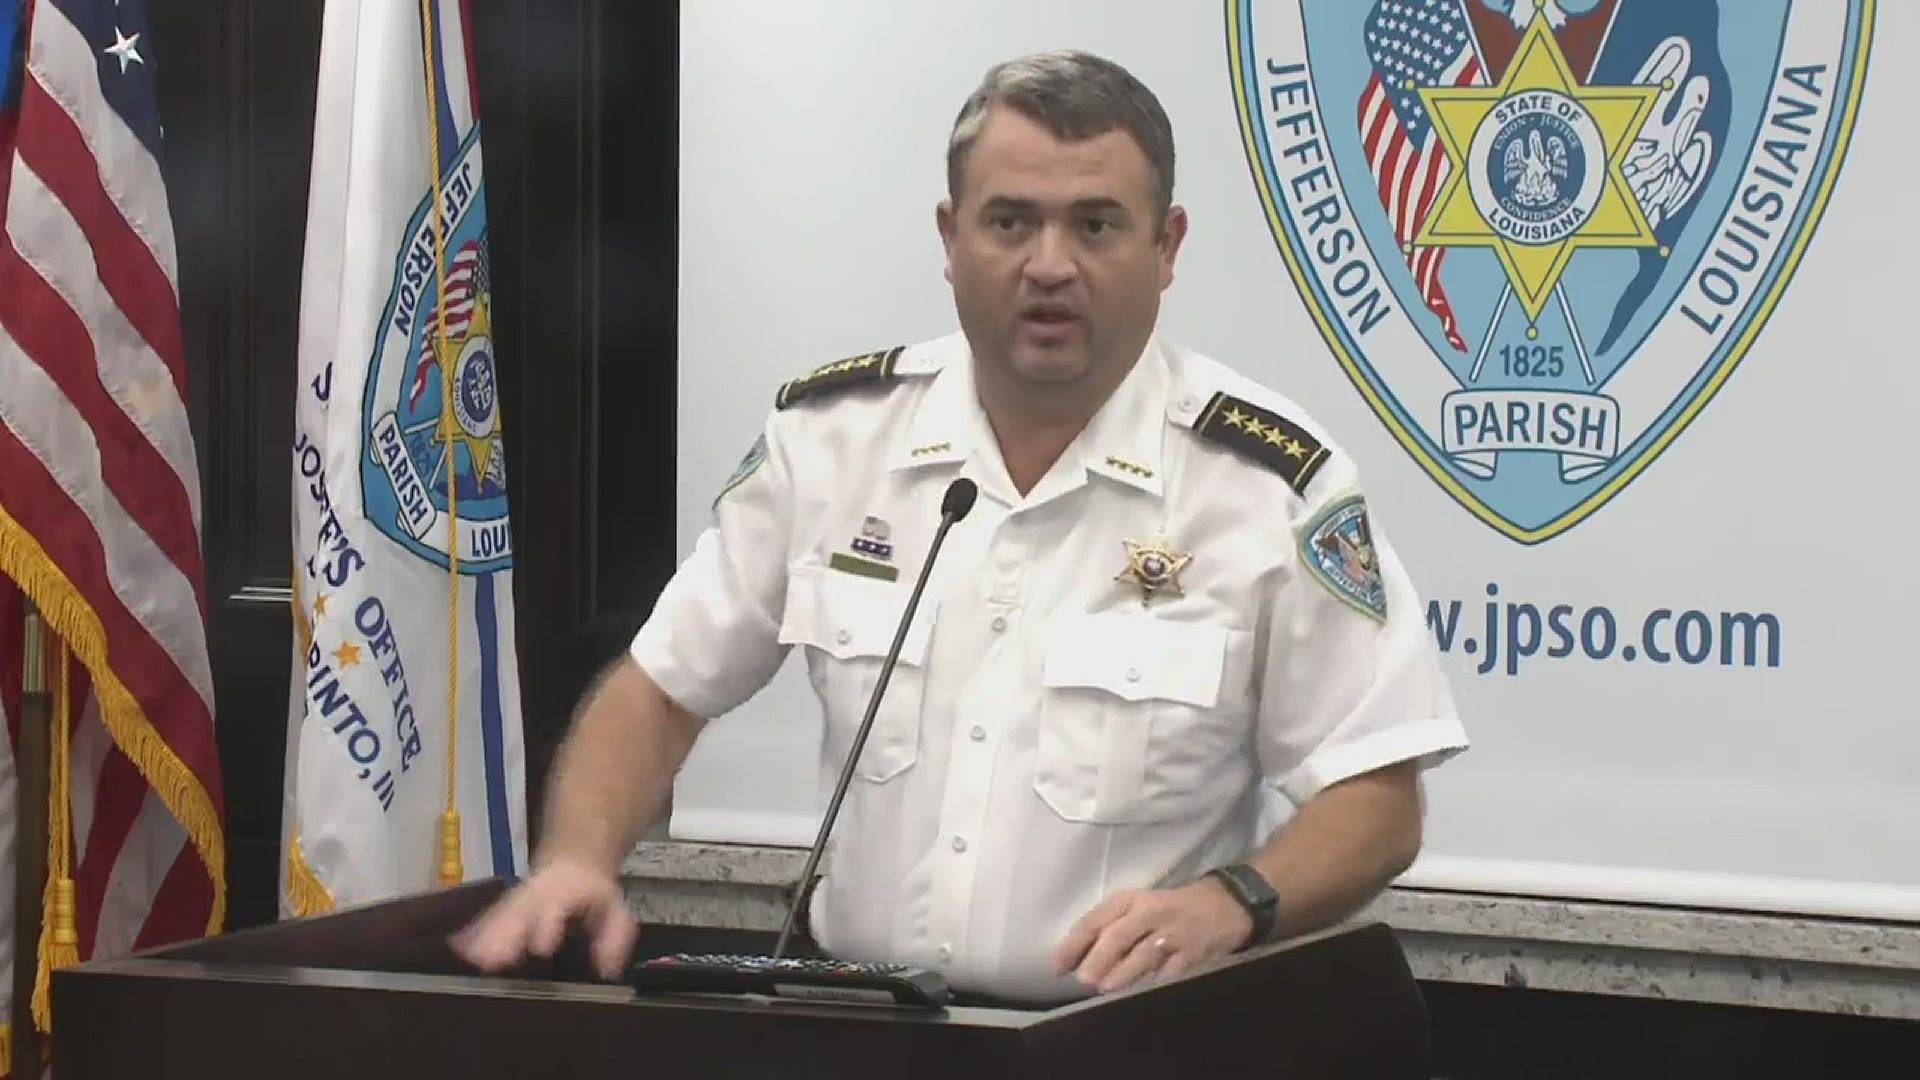 Jefferson Parish Sheriff Joseph Lopinto said it appeared that the suspect was prepared to leave, but then turned around, went back in and started firing.